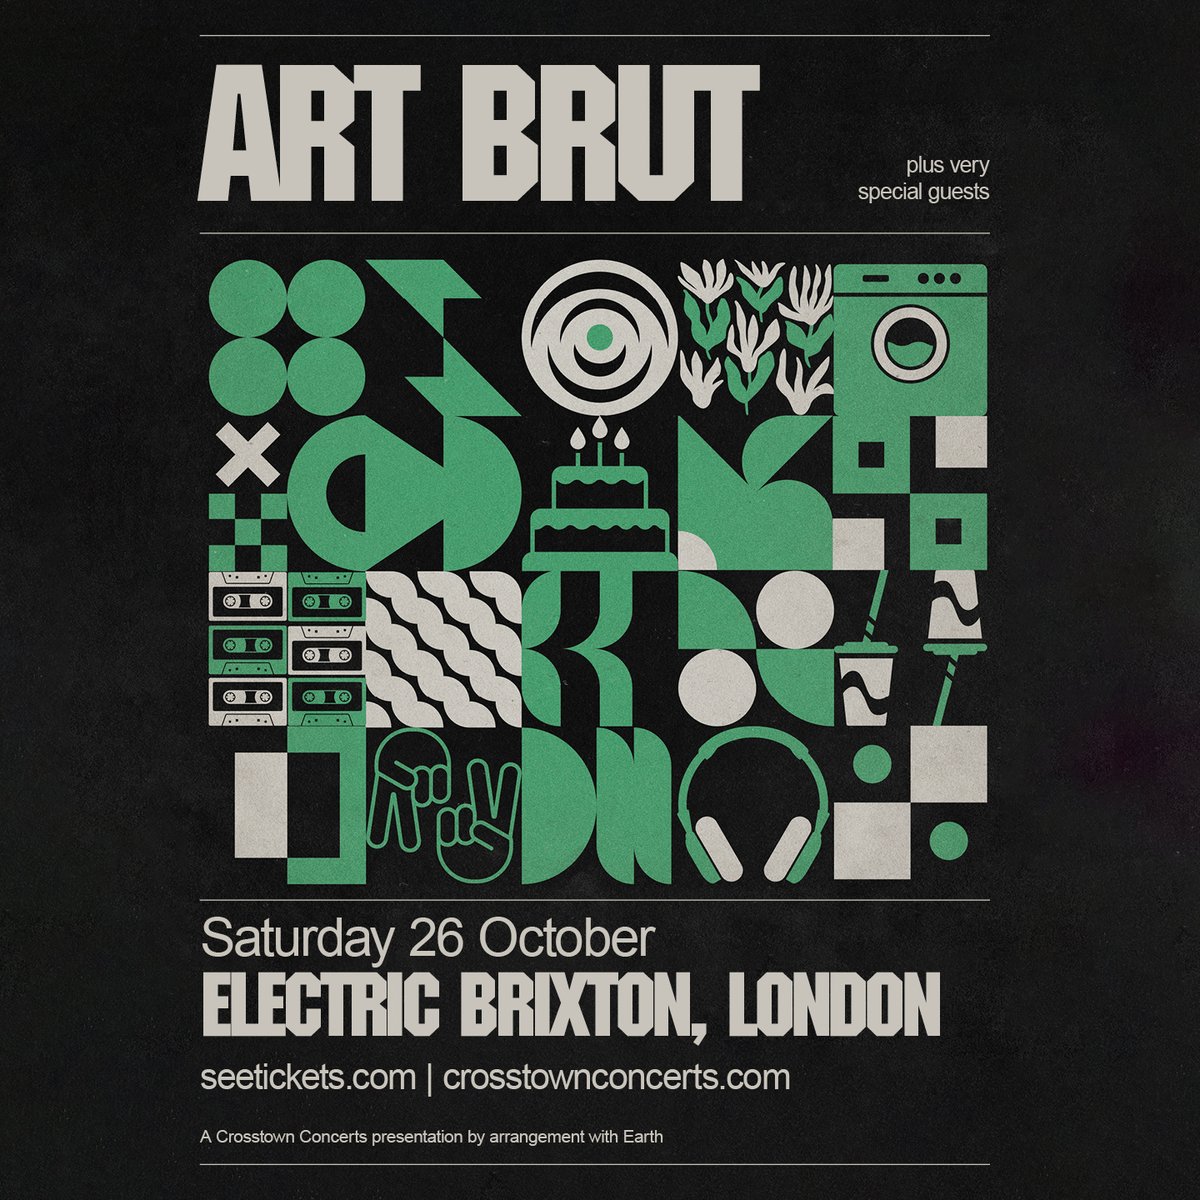 Tickets are on sale now for @Art_Brut_ at @electricbrixton London on Saturday 26th October. crosstownconcerts.seetickets.com/event/art-brut…